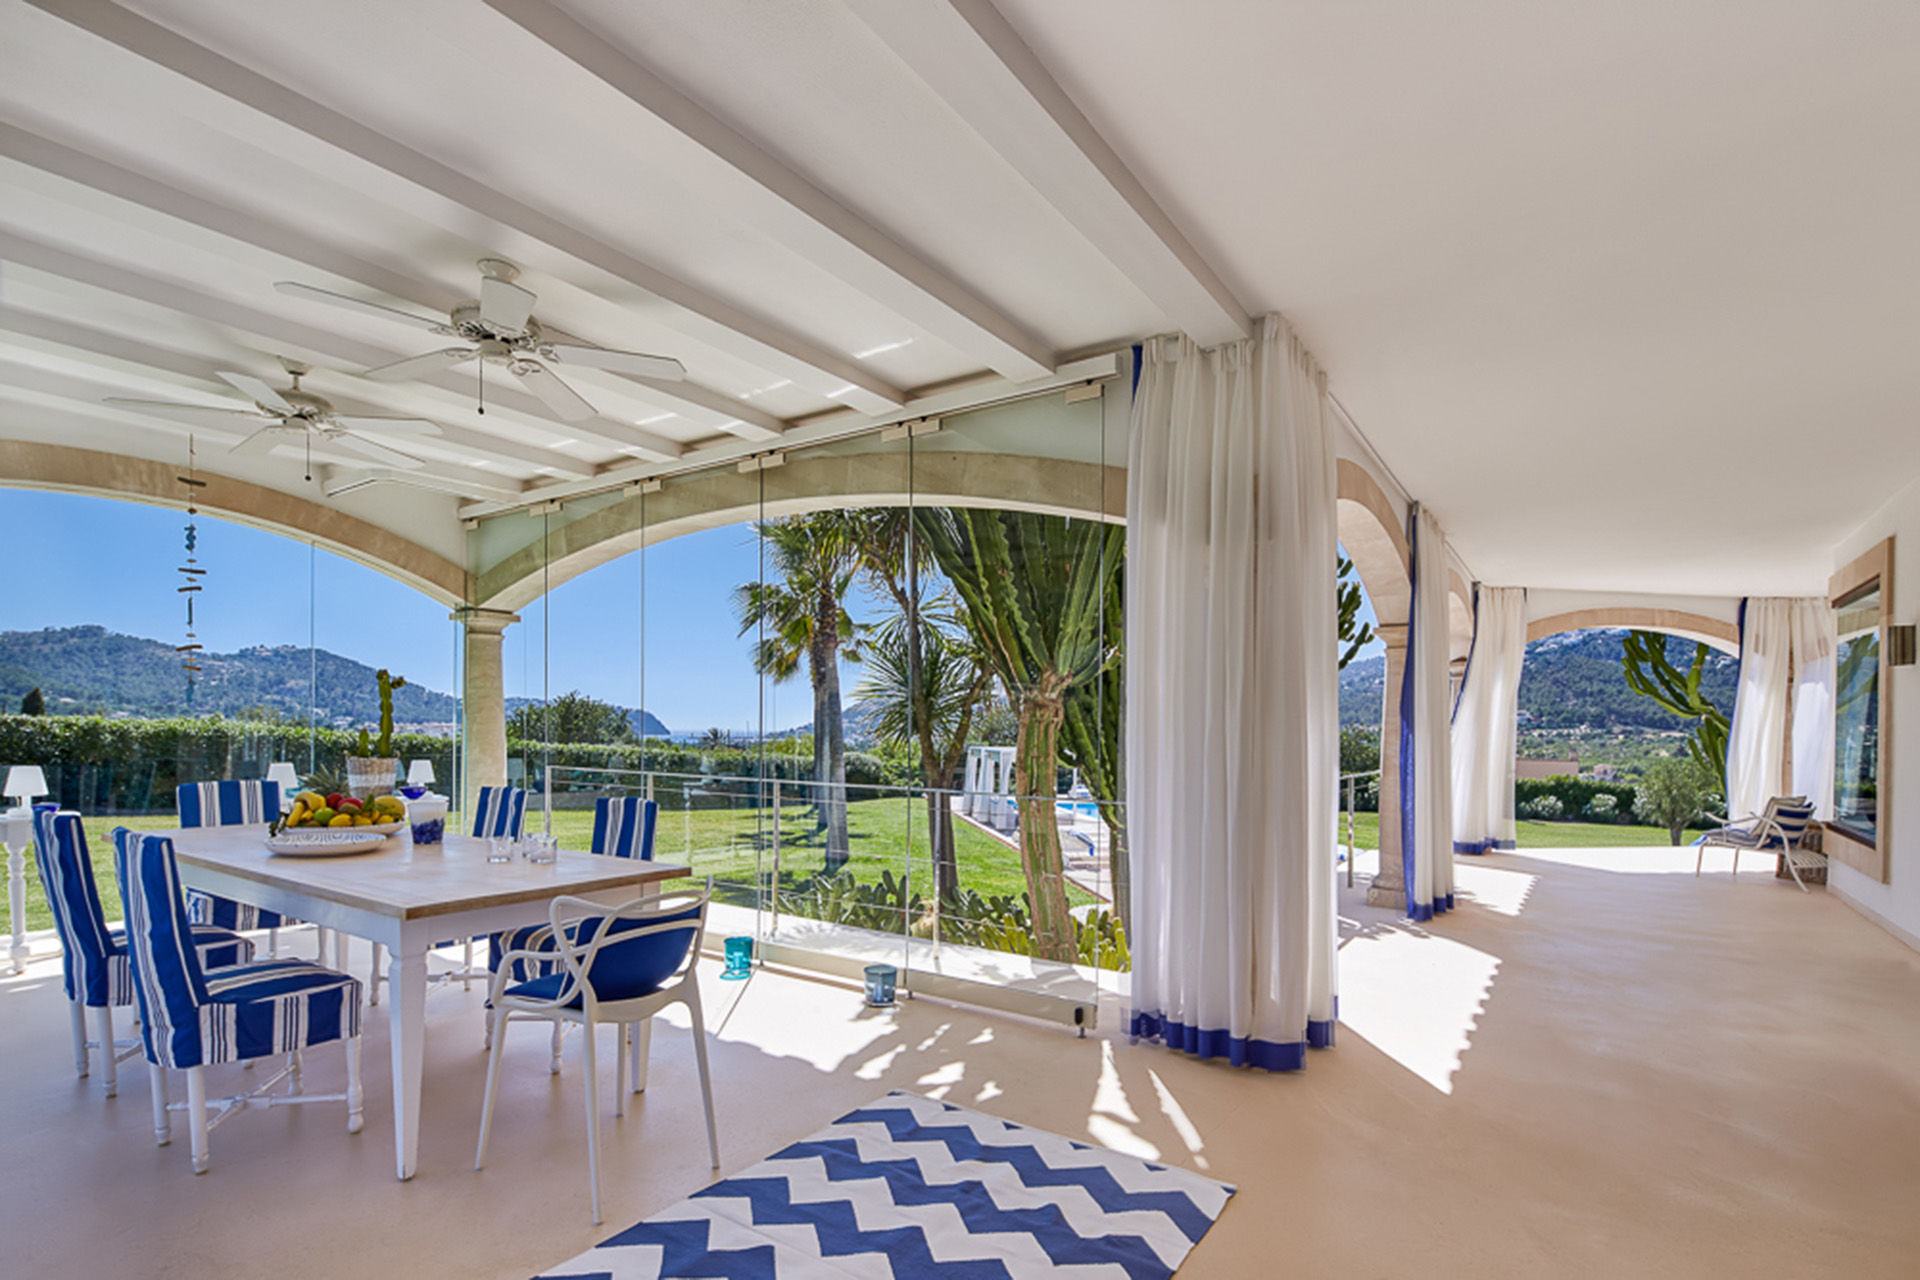 Fantastic finca with fantastic harbor views in Port Andratx - Covered, partially glazed terrace